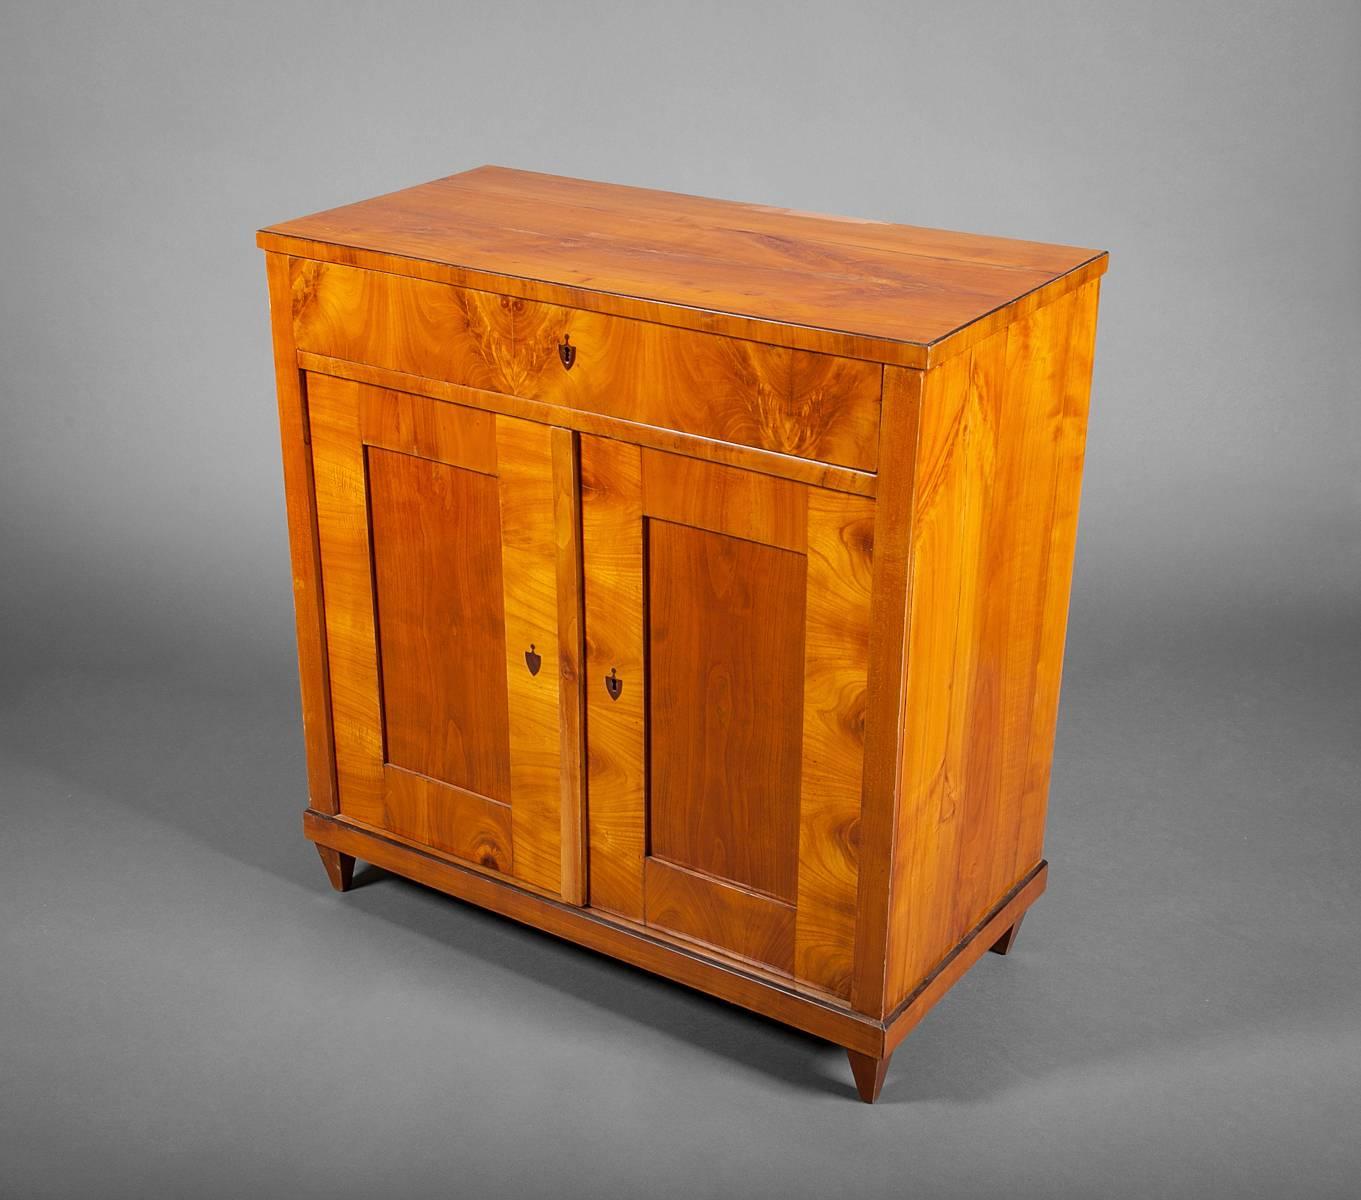 Biedermeier cherry chest with one drawer and lower cabinet.
Comes with key.